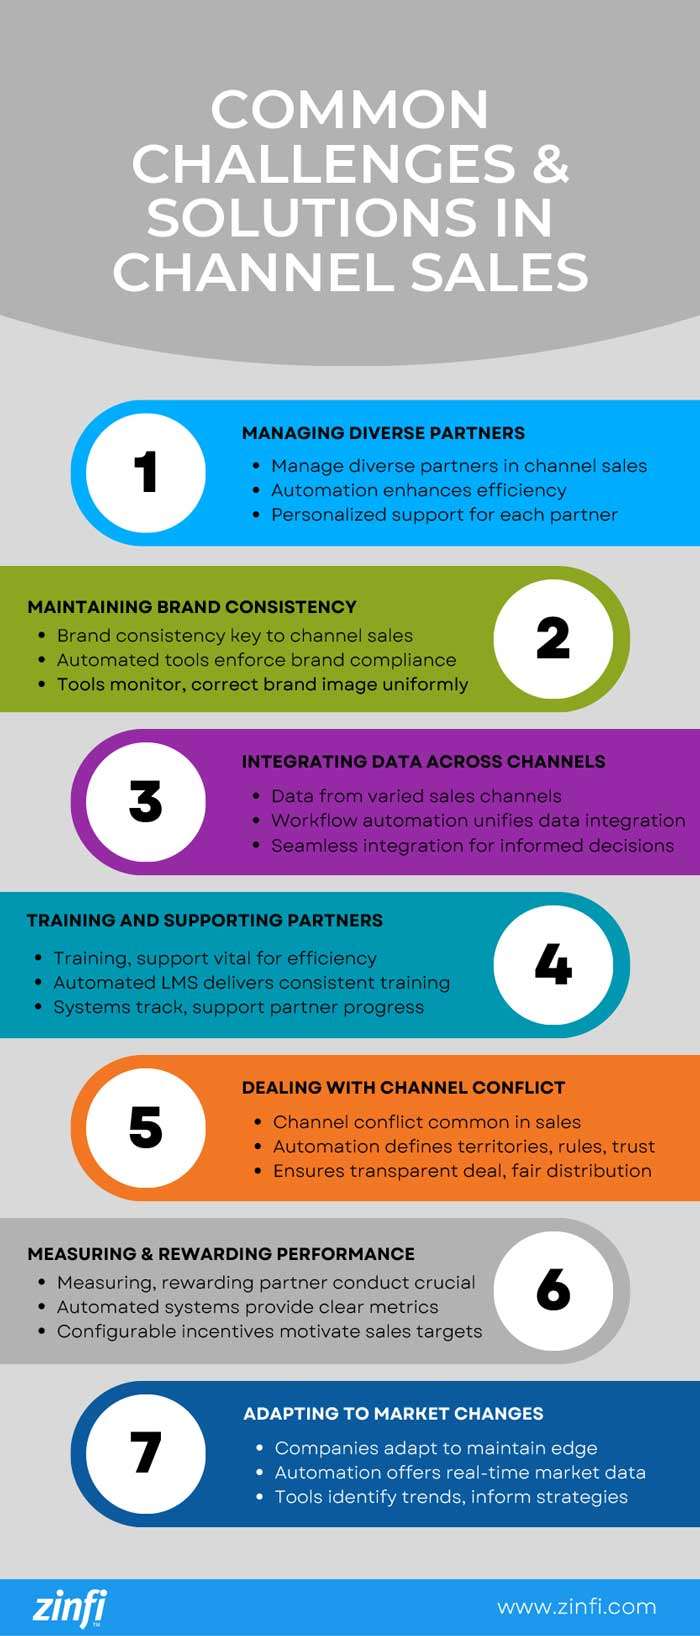 Infographic discussing the common challenges and solutions of channel sales